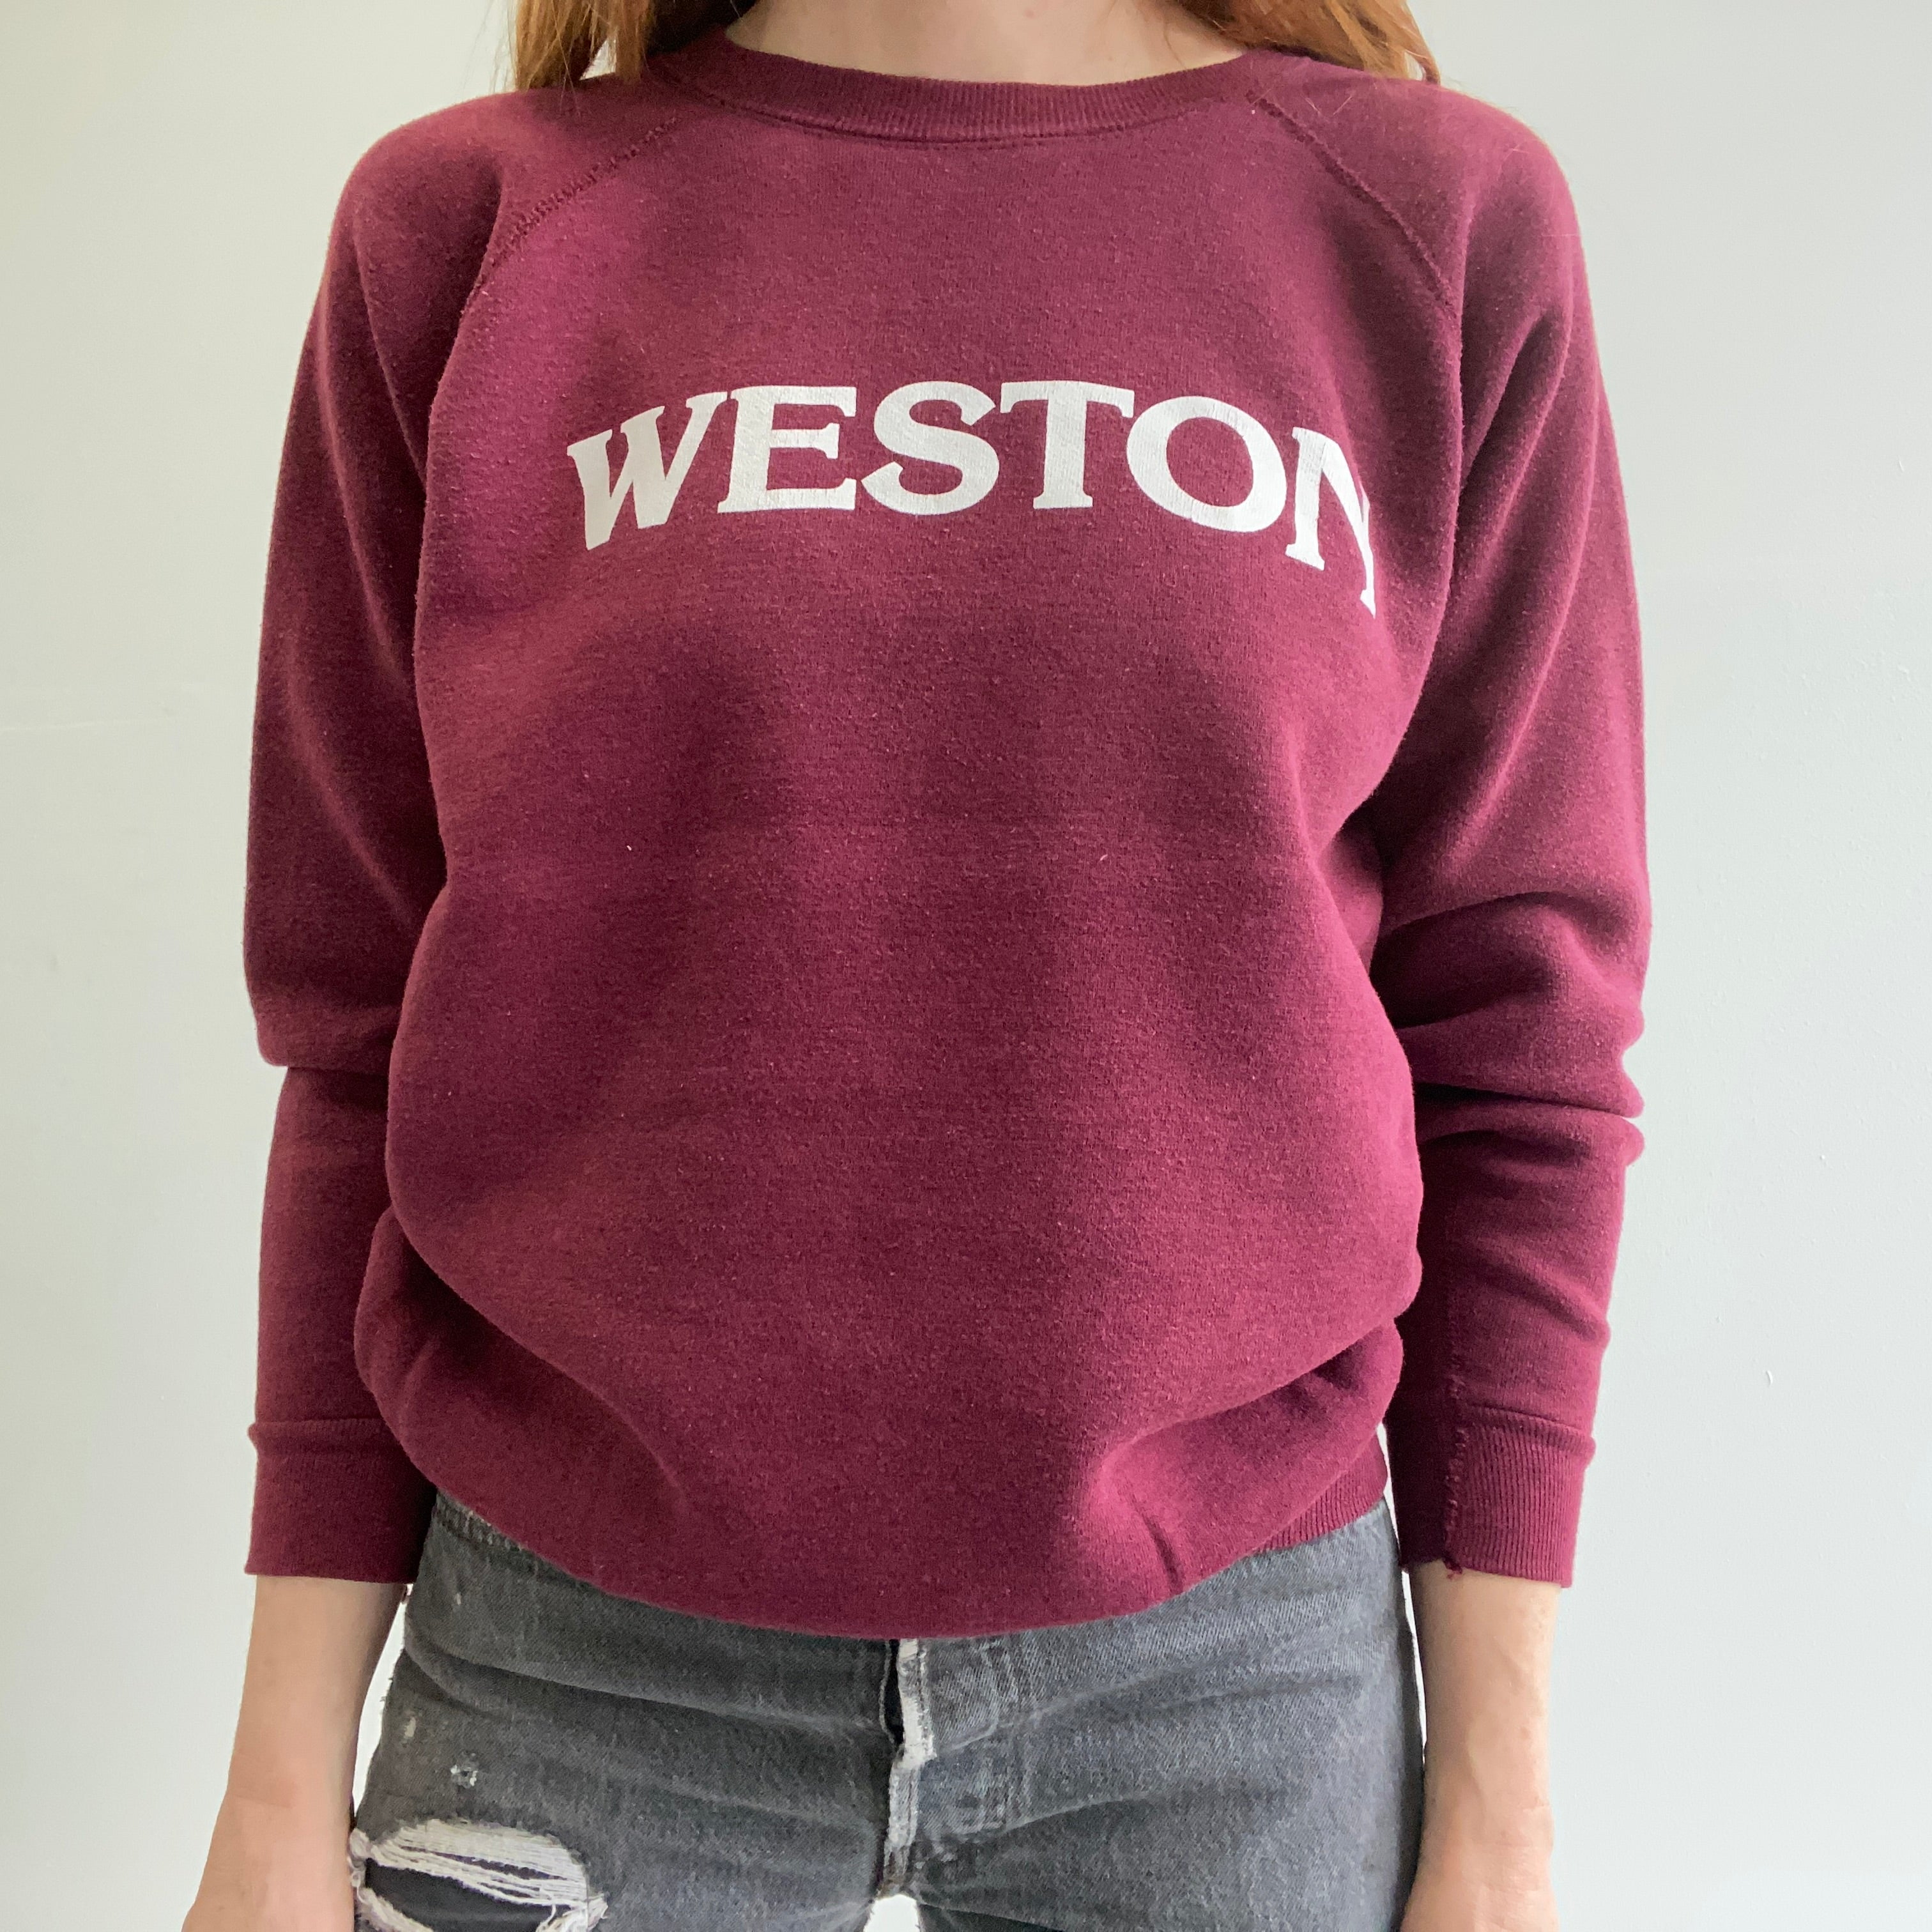 1970s « The College House » Marque Weston Double Arm Gusset AWESOME College Sweatshirt